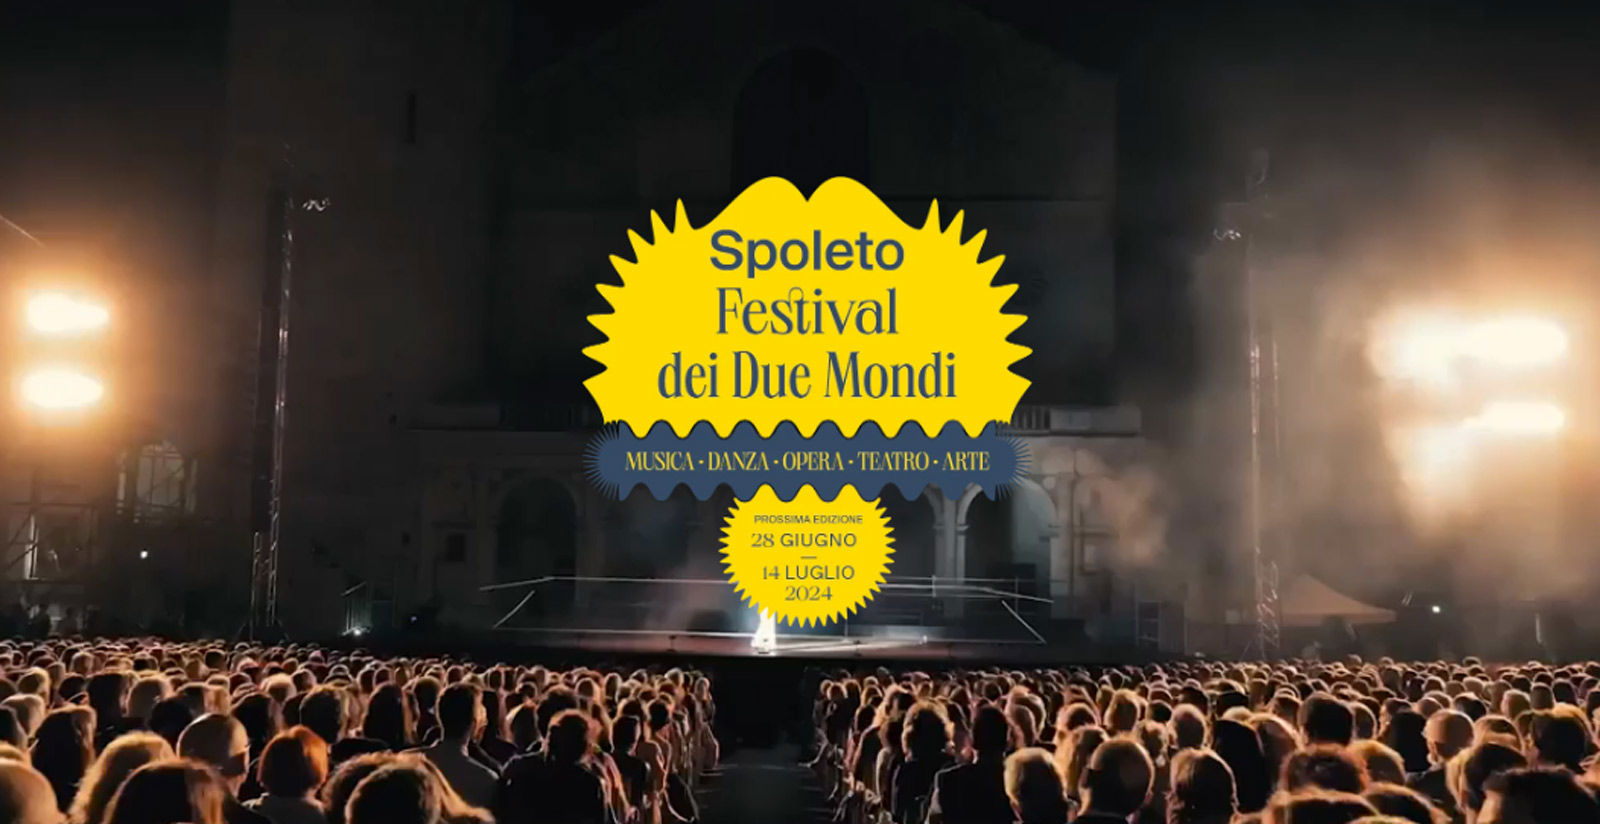 Spoleto, Festival of the Two Worlds 1